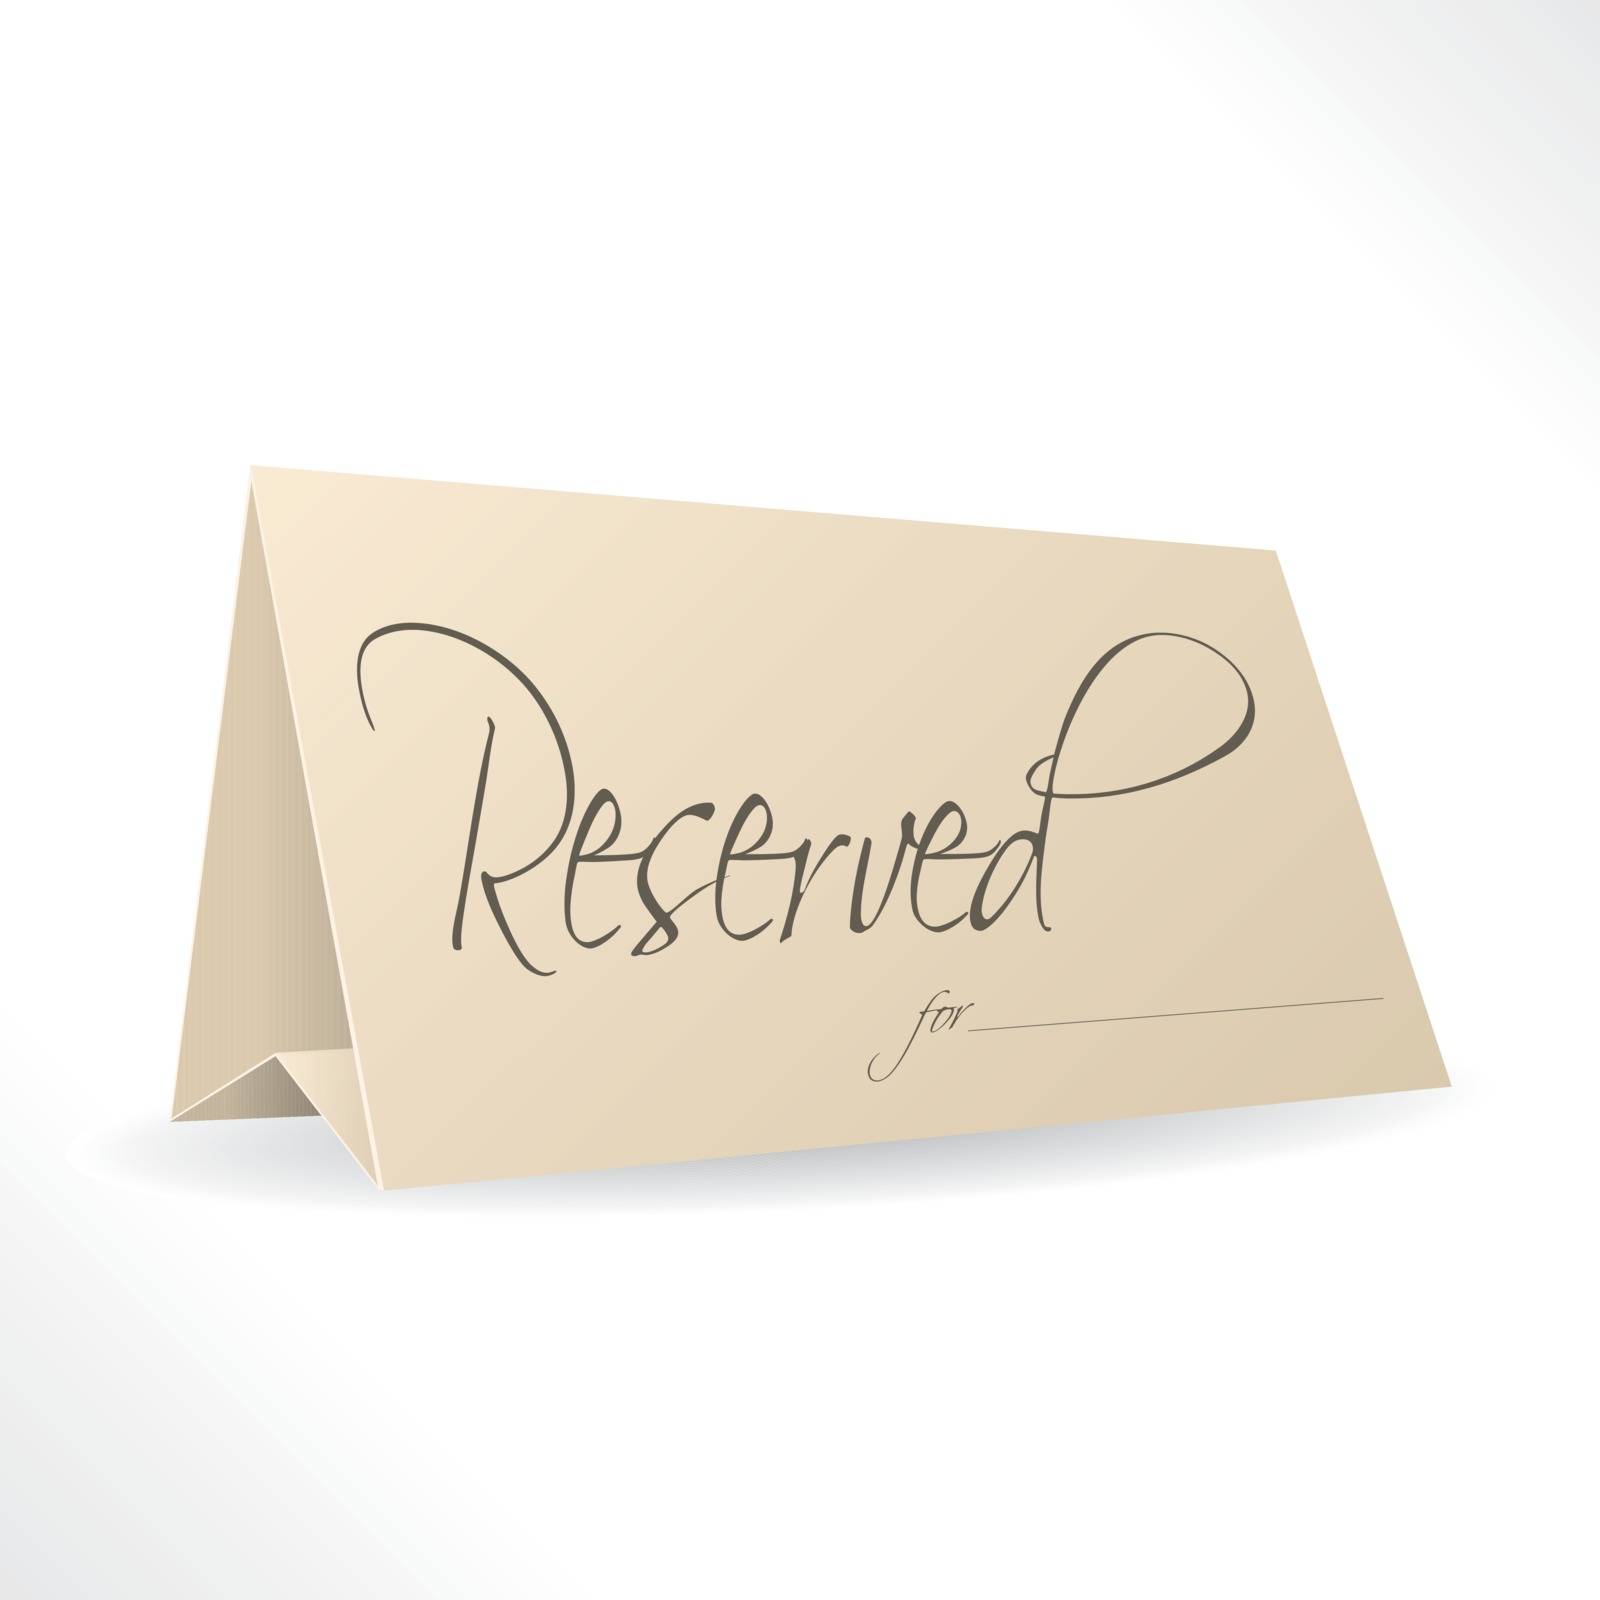 Reserved note with place for name on white background